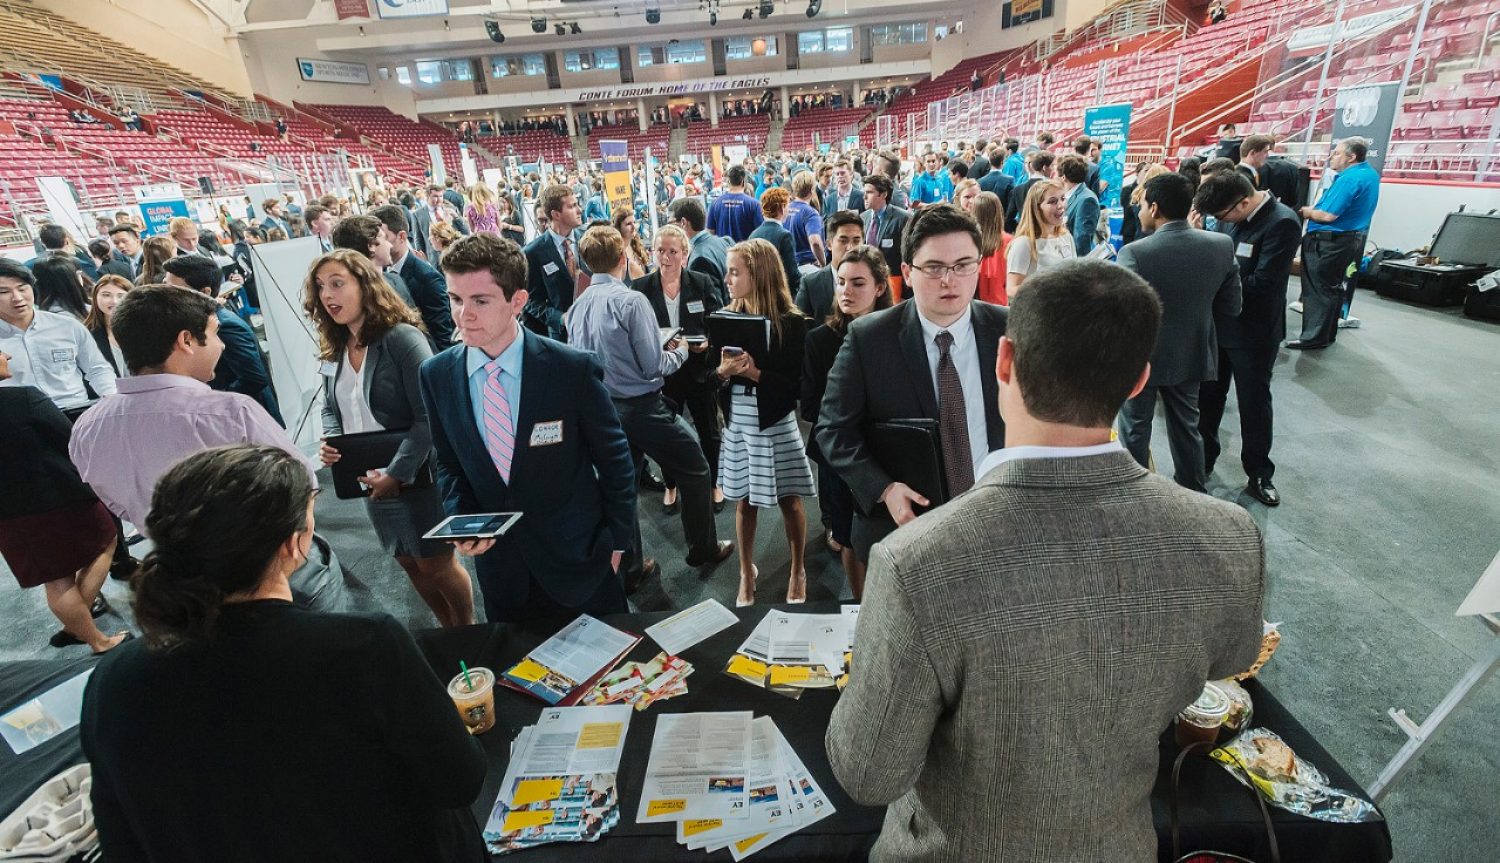 AA record-breaking number of students attended the Boston College 2016 Fall Career and Intership Fair in Conte Forum.